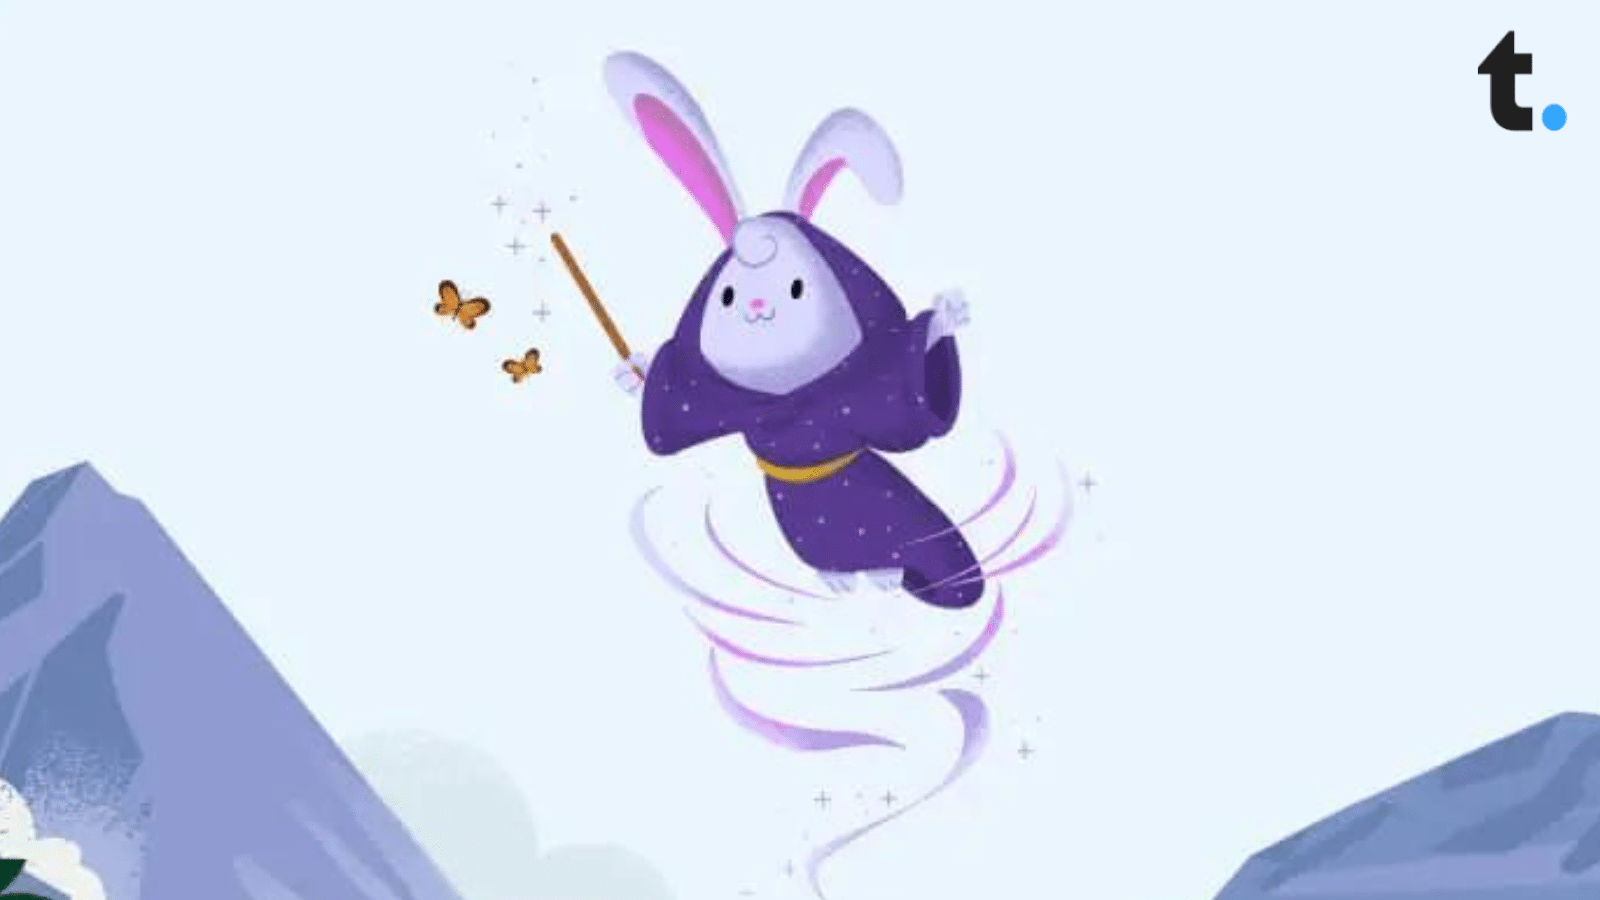 The Salesforce Genie rabbit flying in the sky with their magic wand